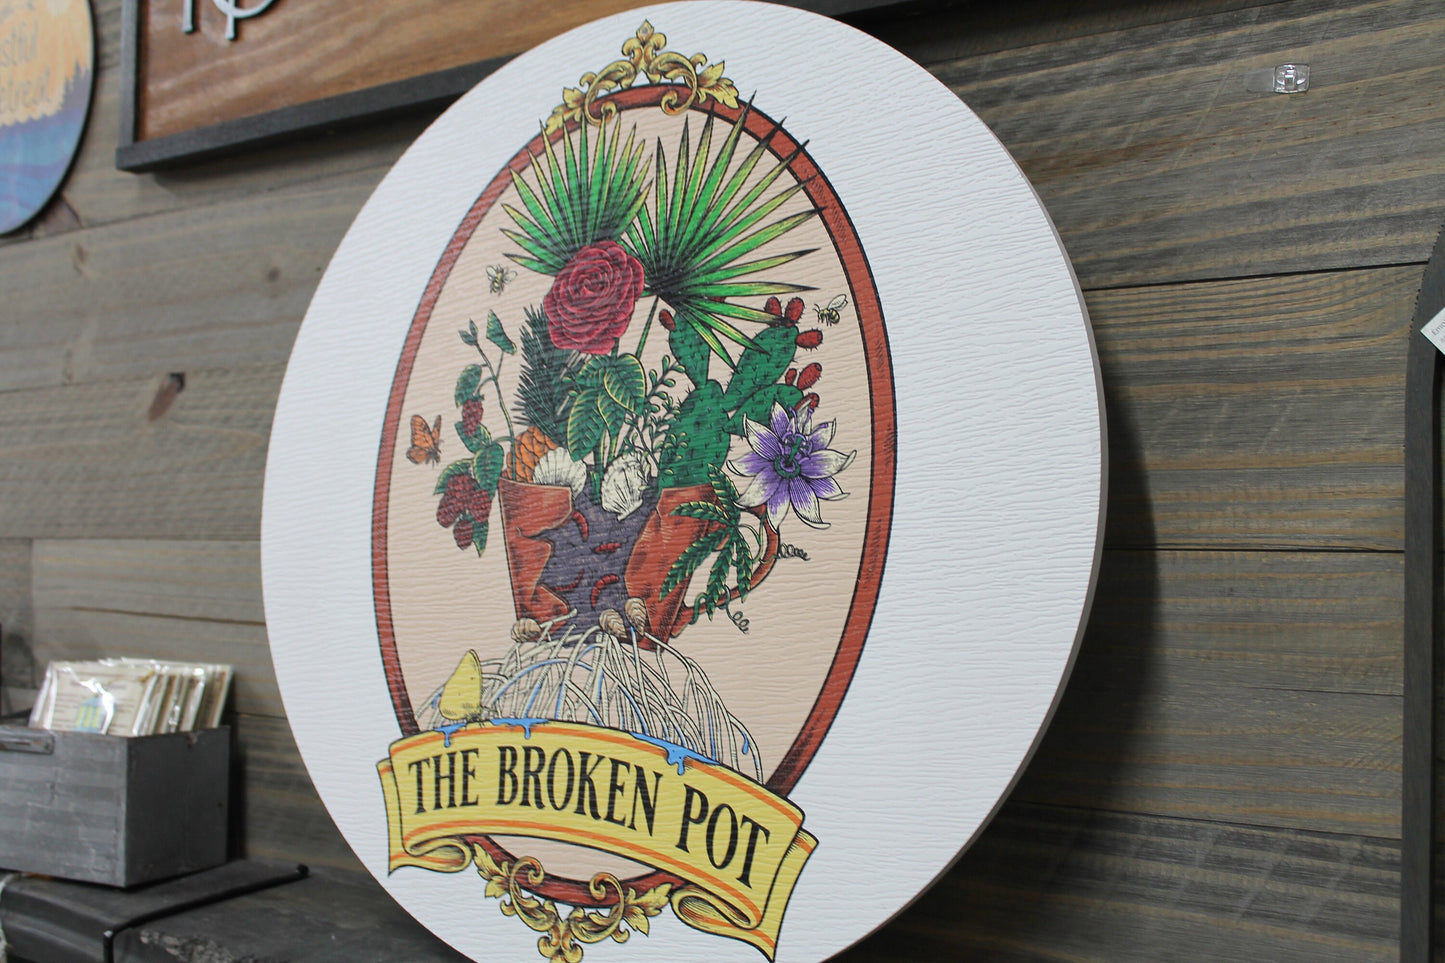 Personalized Waterproof Sign Colorful Broken Pot Garden Textured Round Circle Ready for your Business Logo Great for hanging or wall mounted